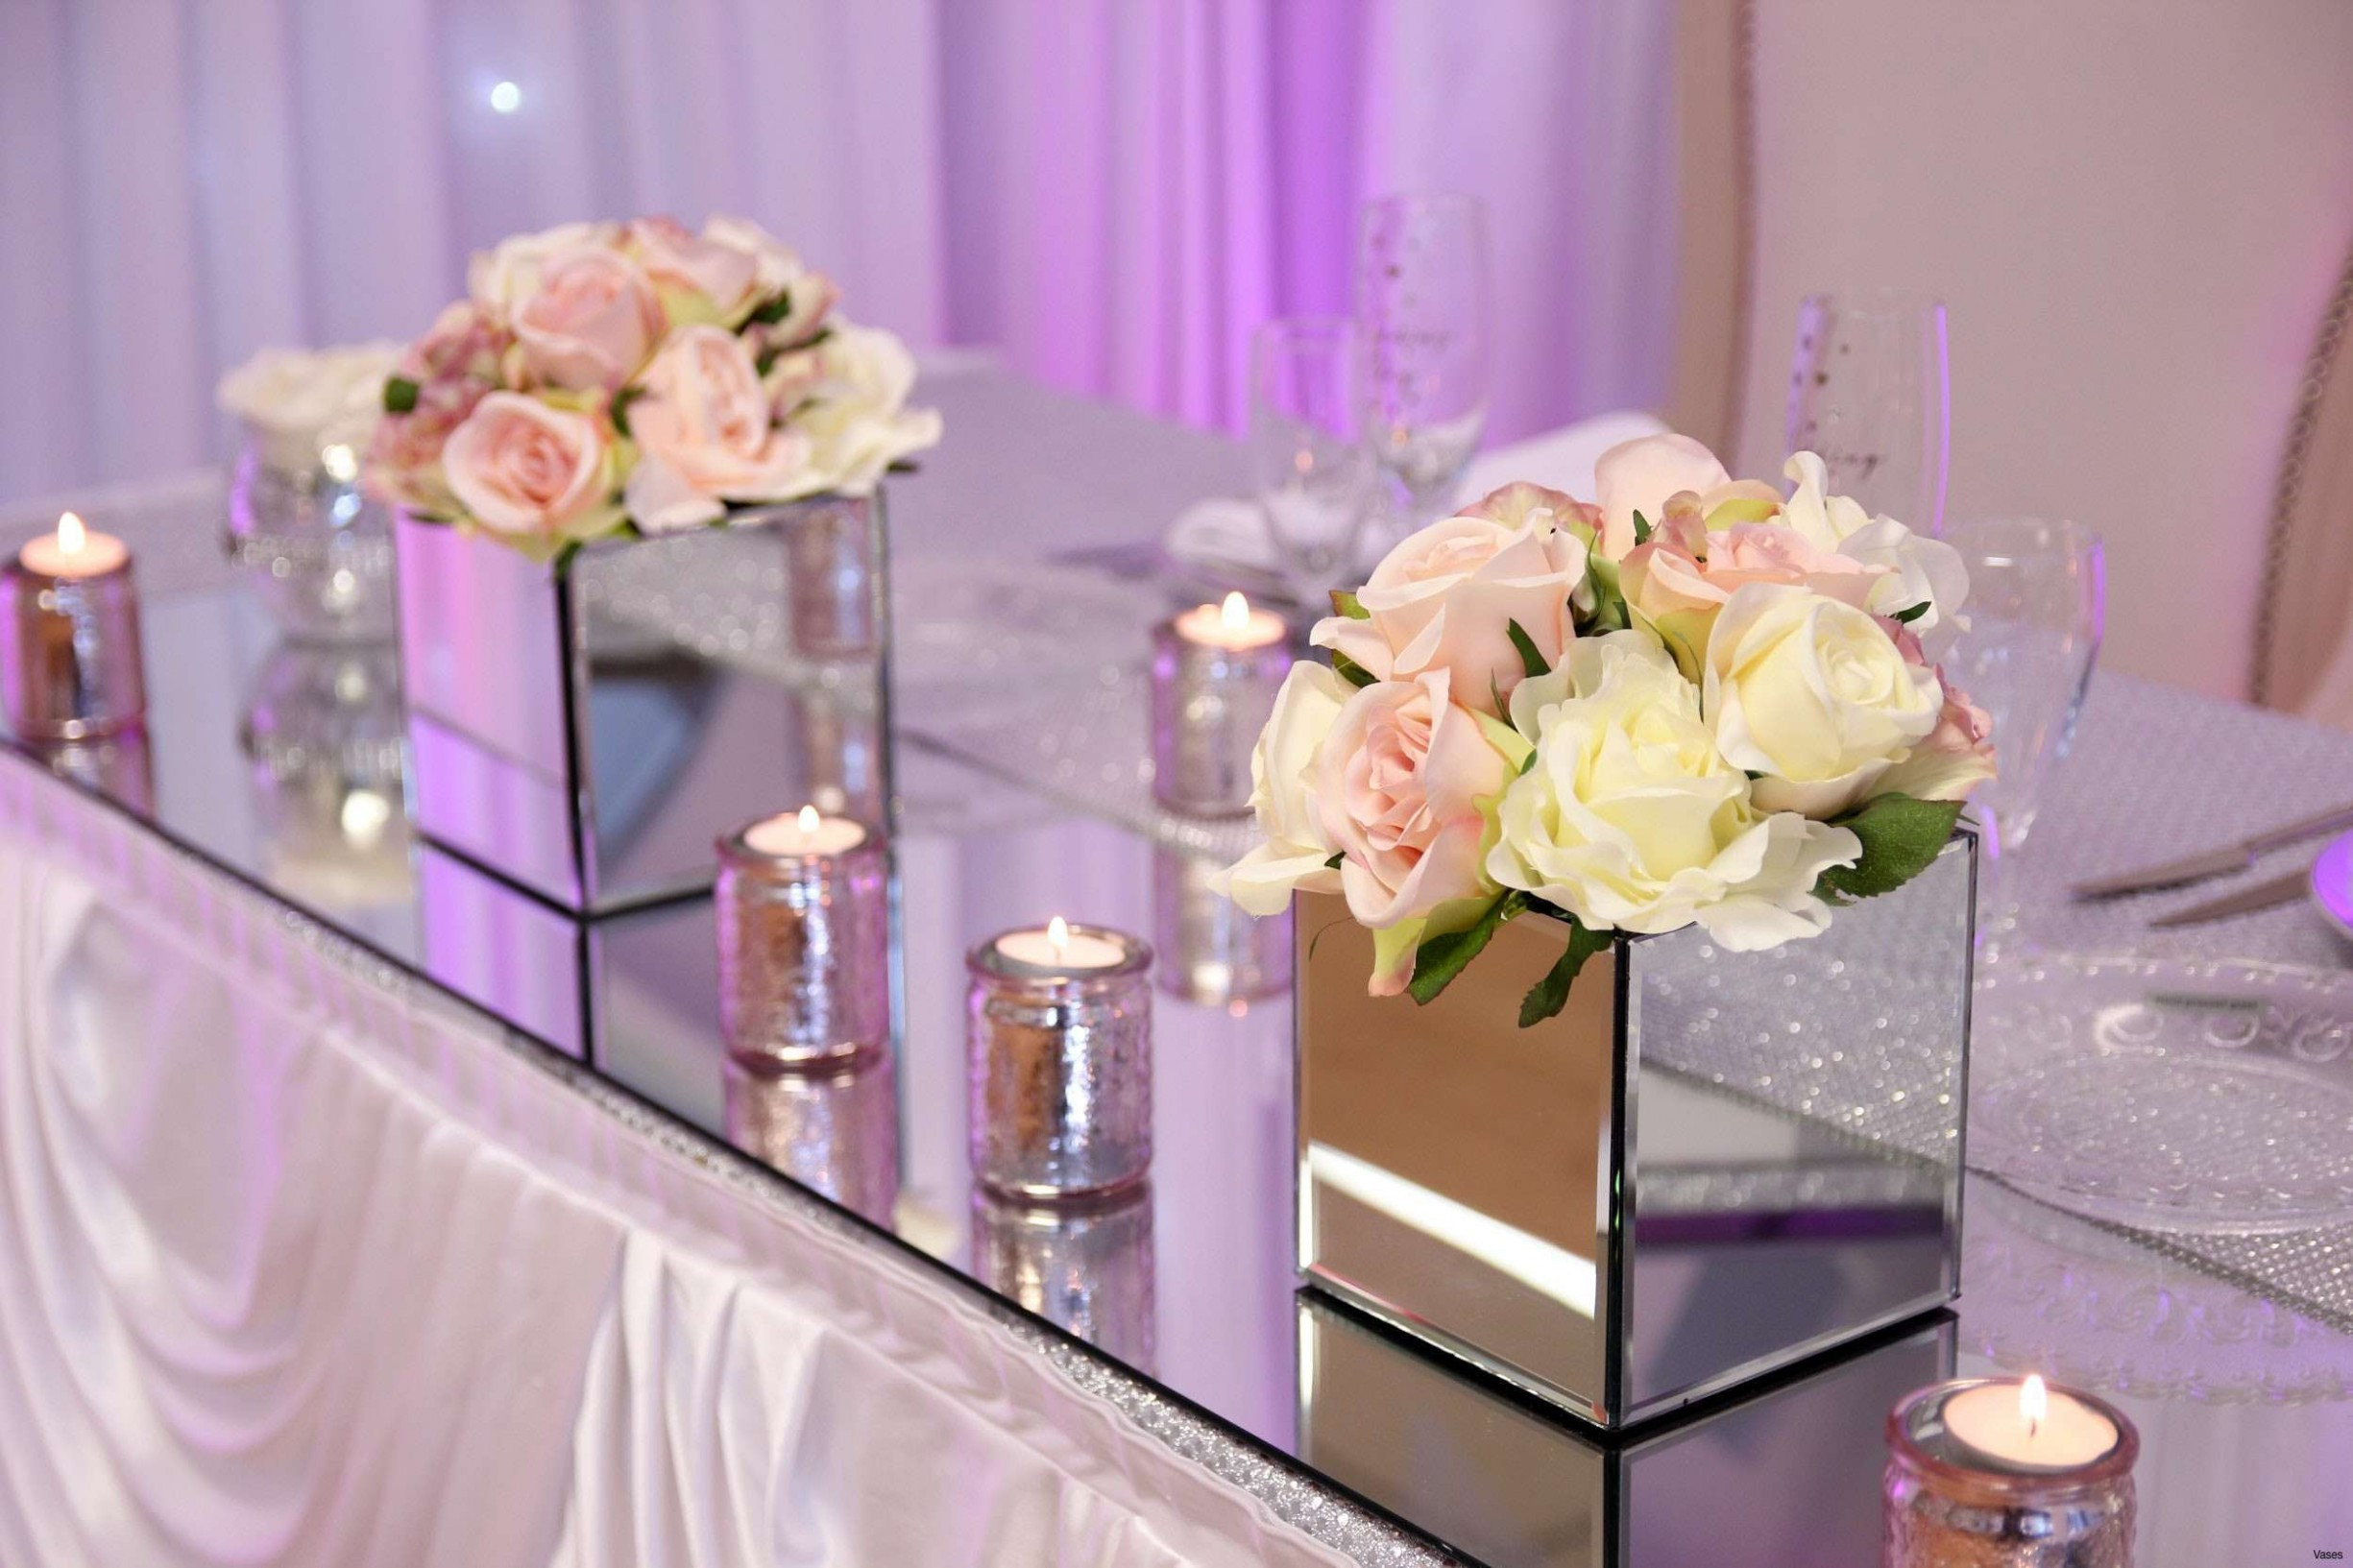 23 Awesome Black Vase Centerpieces 2024 free download black vase centerpieces of wedding centerpieces with square vases www topsimages com with mirrored square vase vases mirror table decorationi weddings jpg 2450x1633 wedding centerpieces with